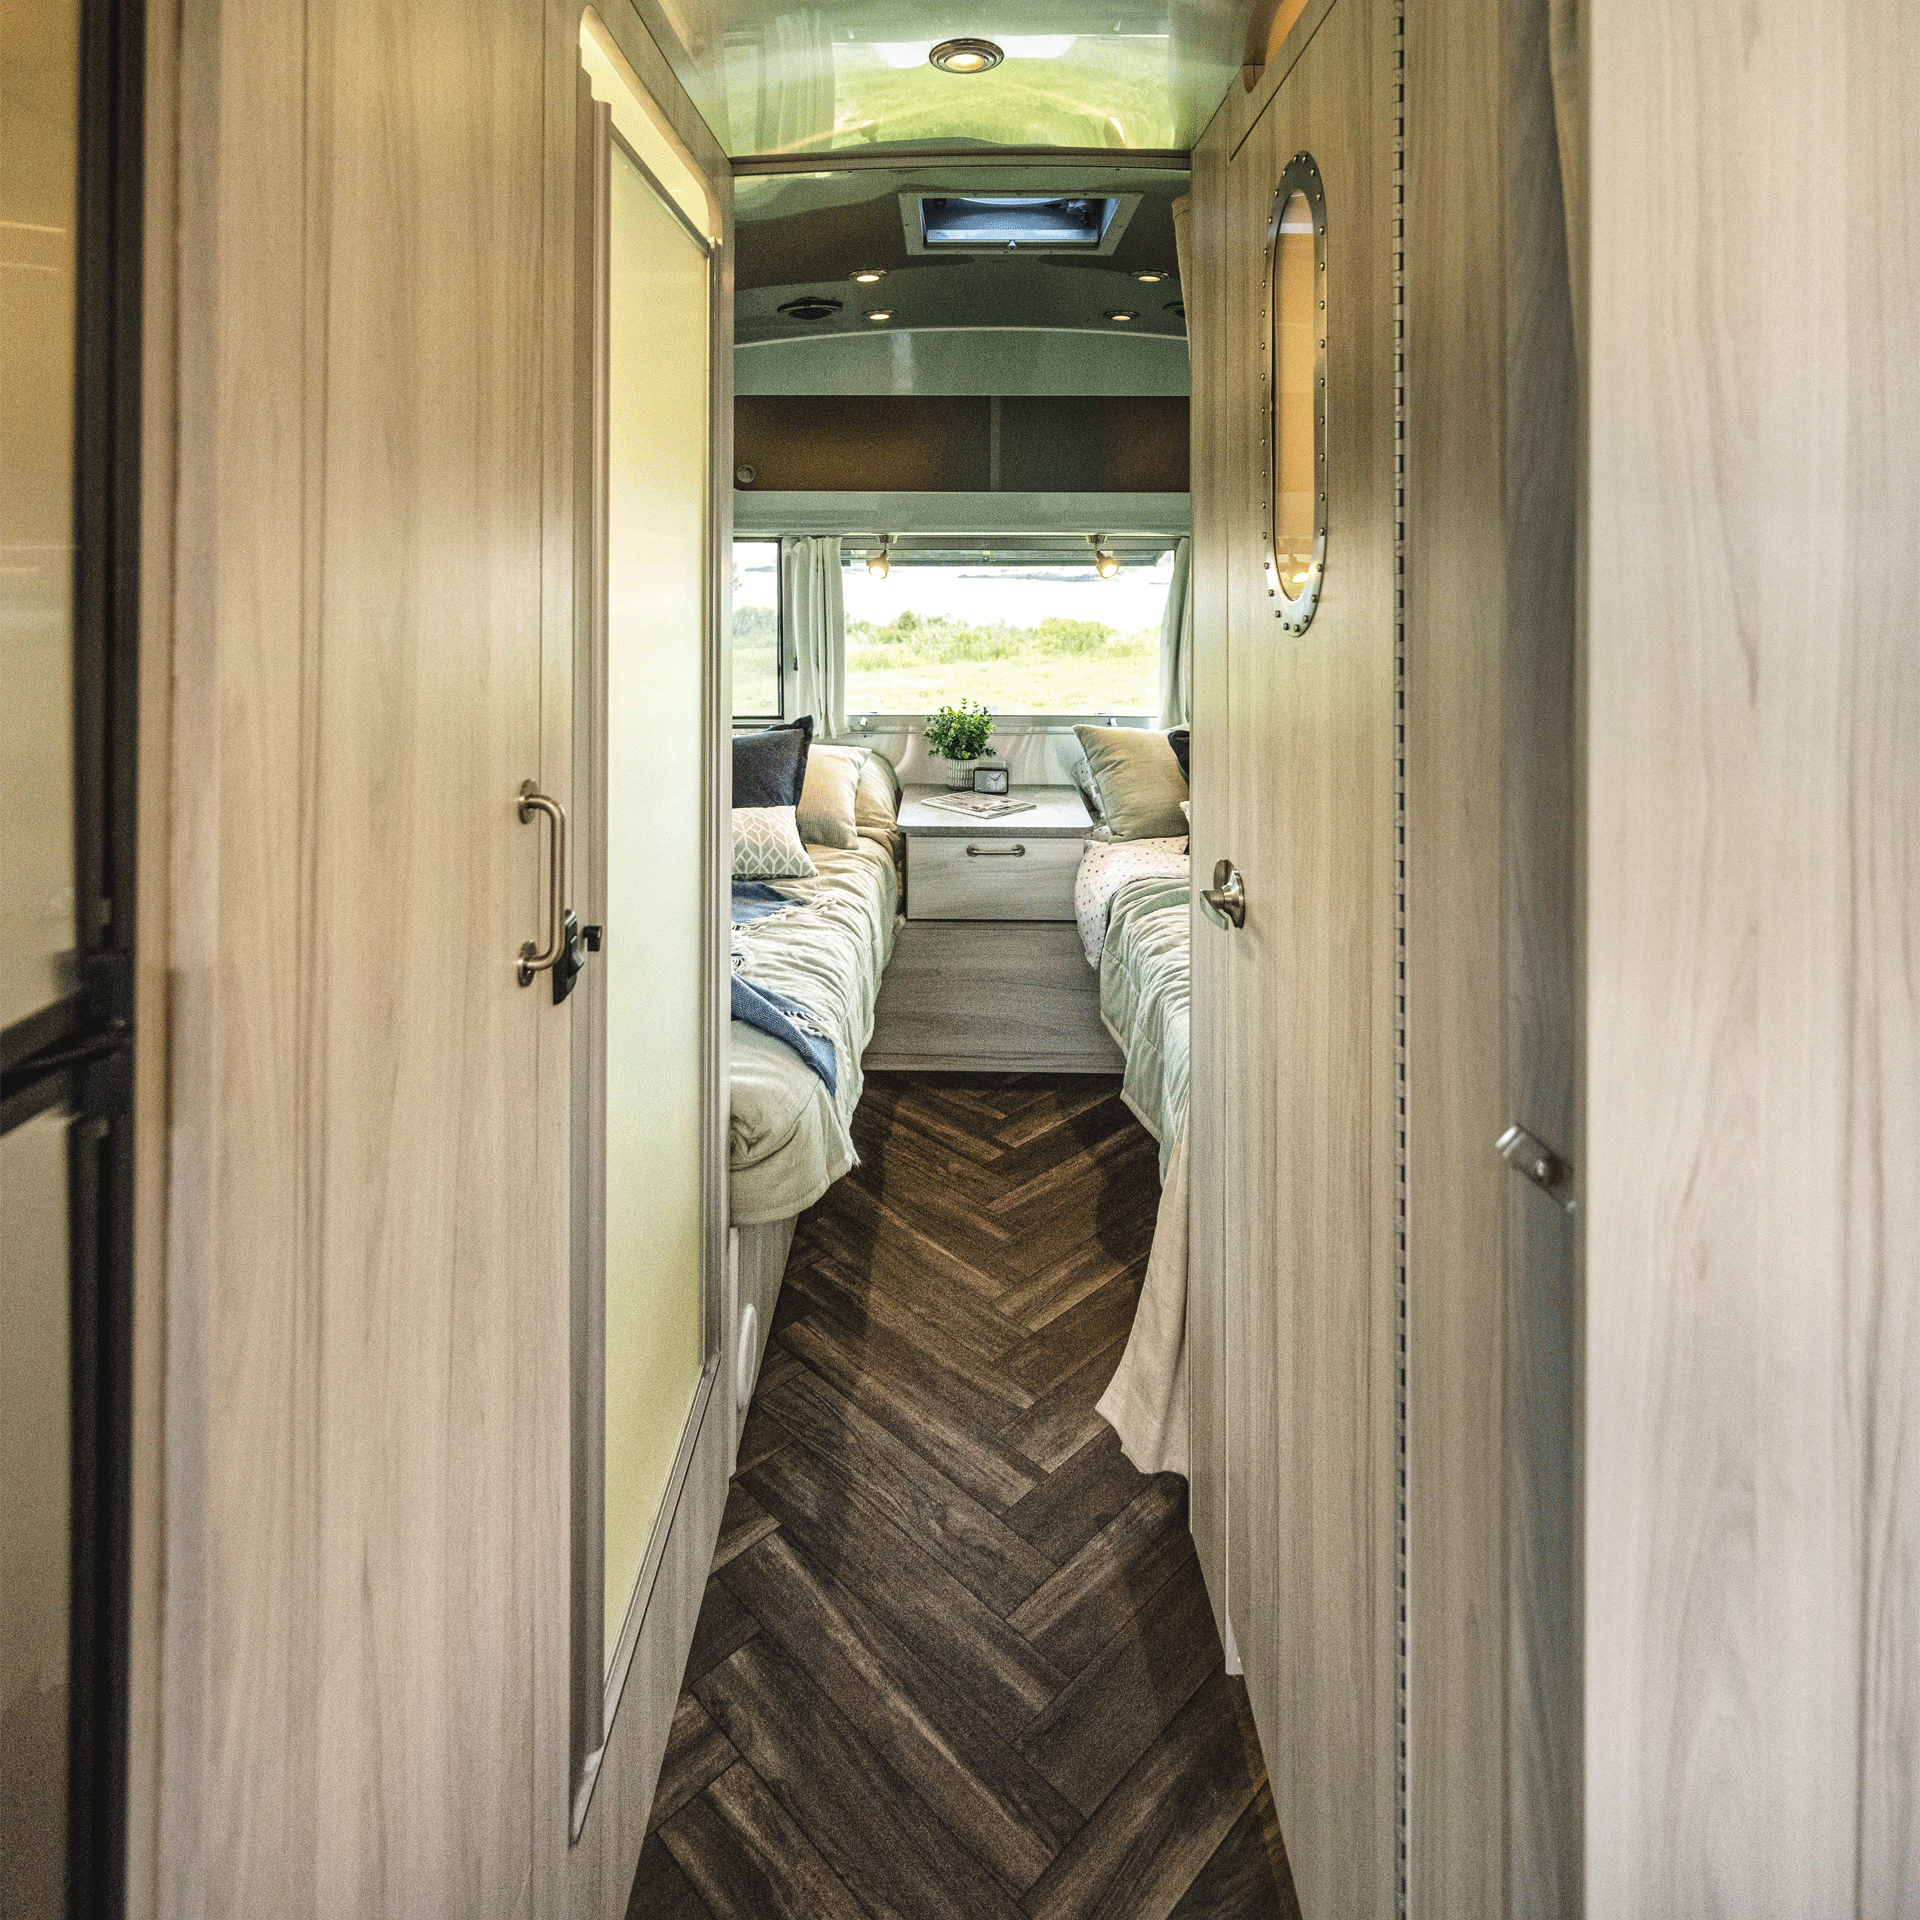 Airstream international travel trailer laminate used throughout the camper.